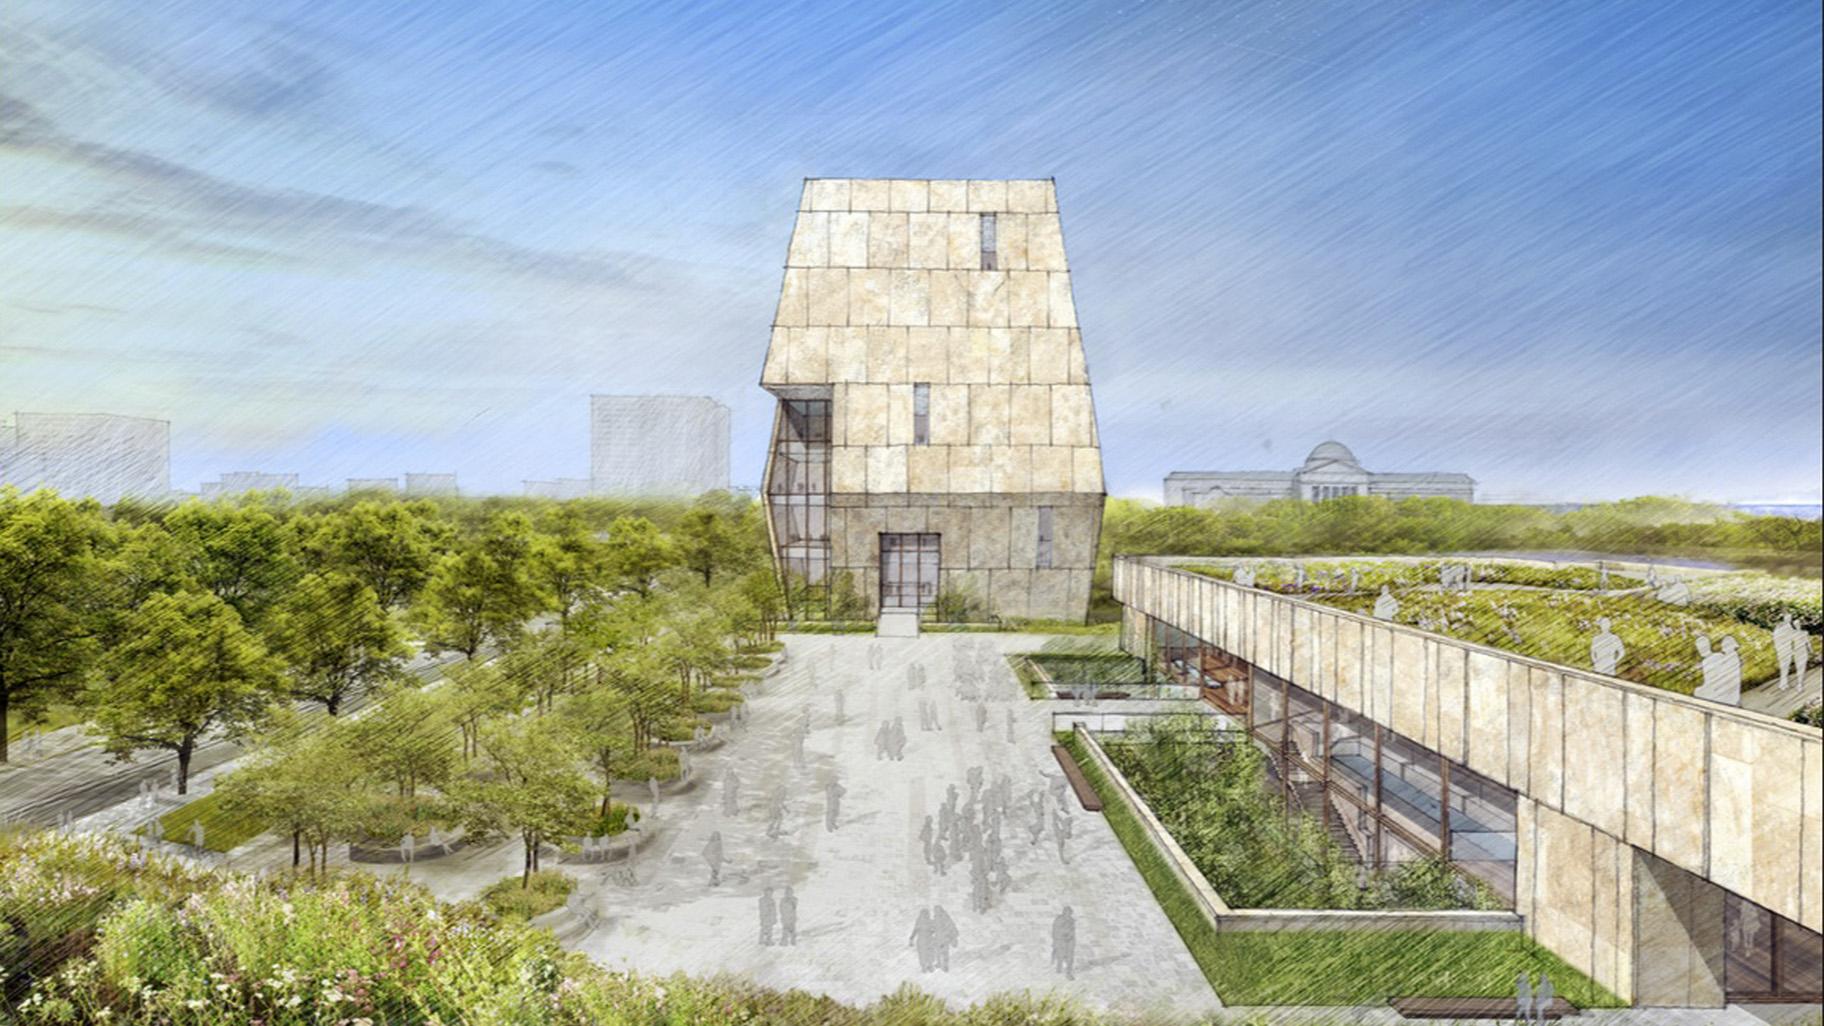 This illustration released on May 3, 2017 by the Obama Foundation shows plans for the proposed Obama Presidential Center with a museum, rear, in Jackson Park. (Obama Foundation via AP, File)